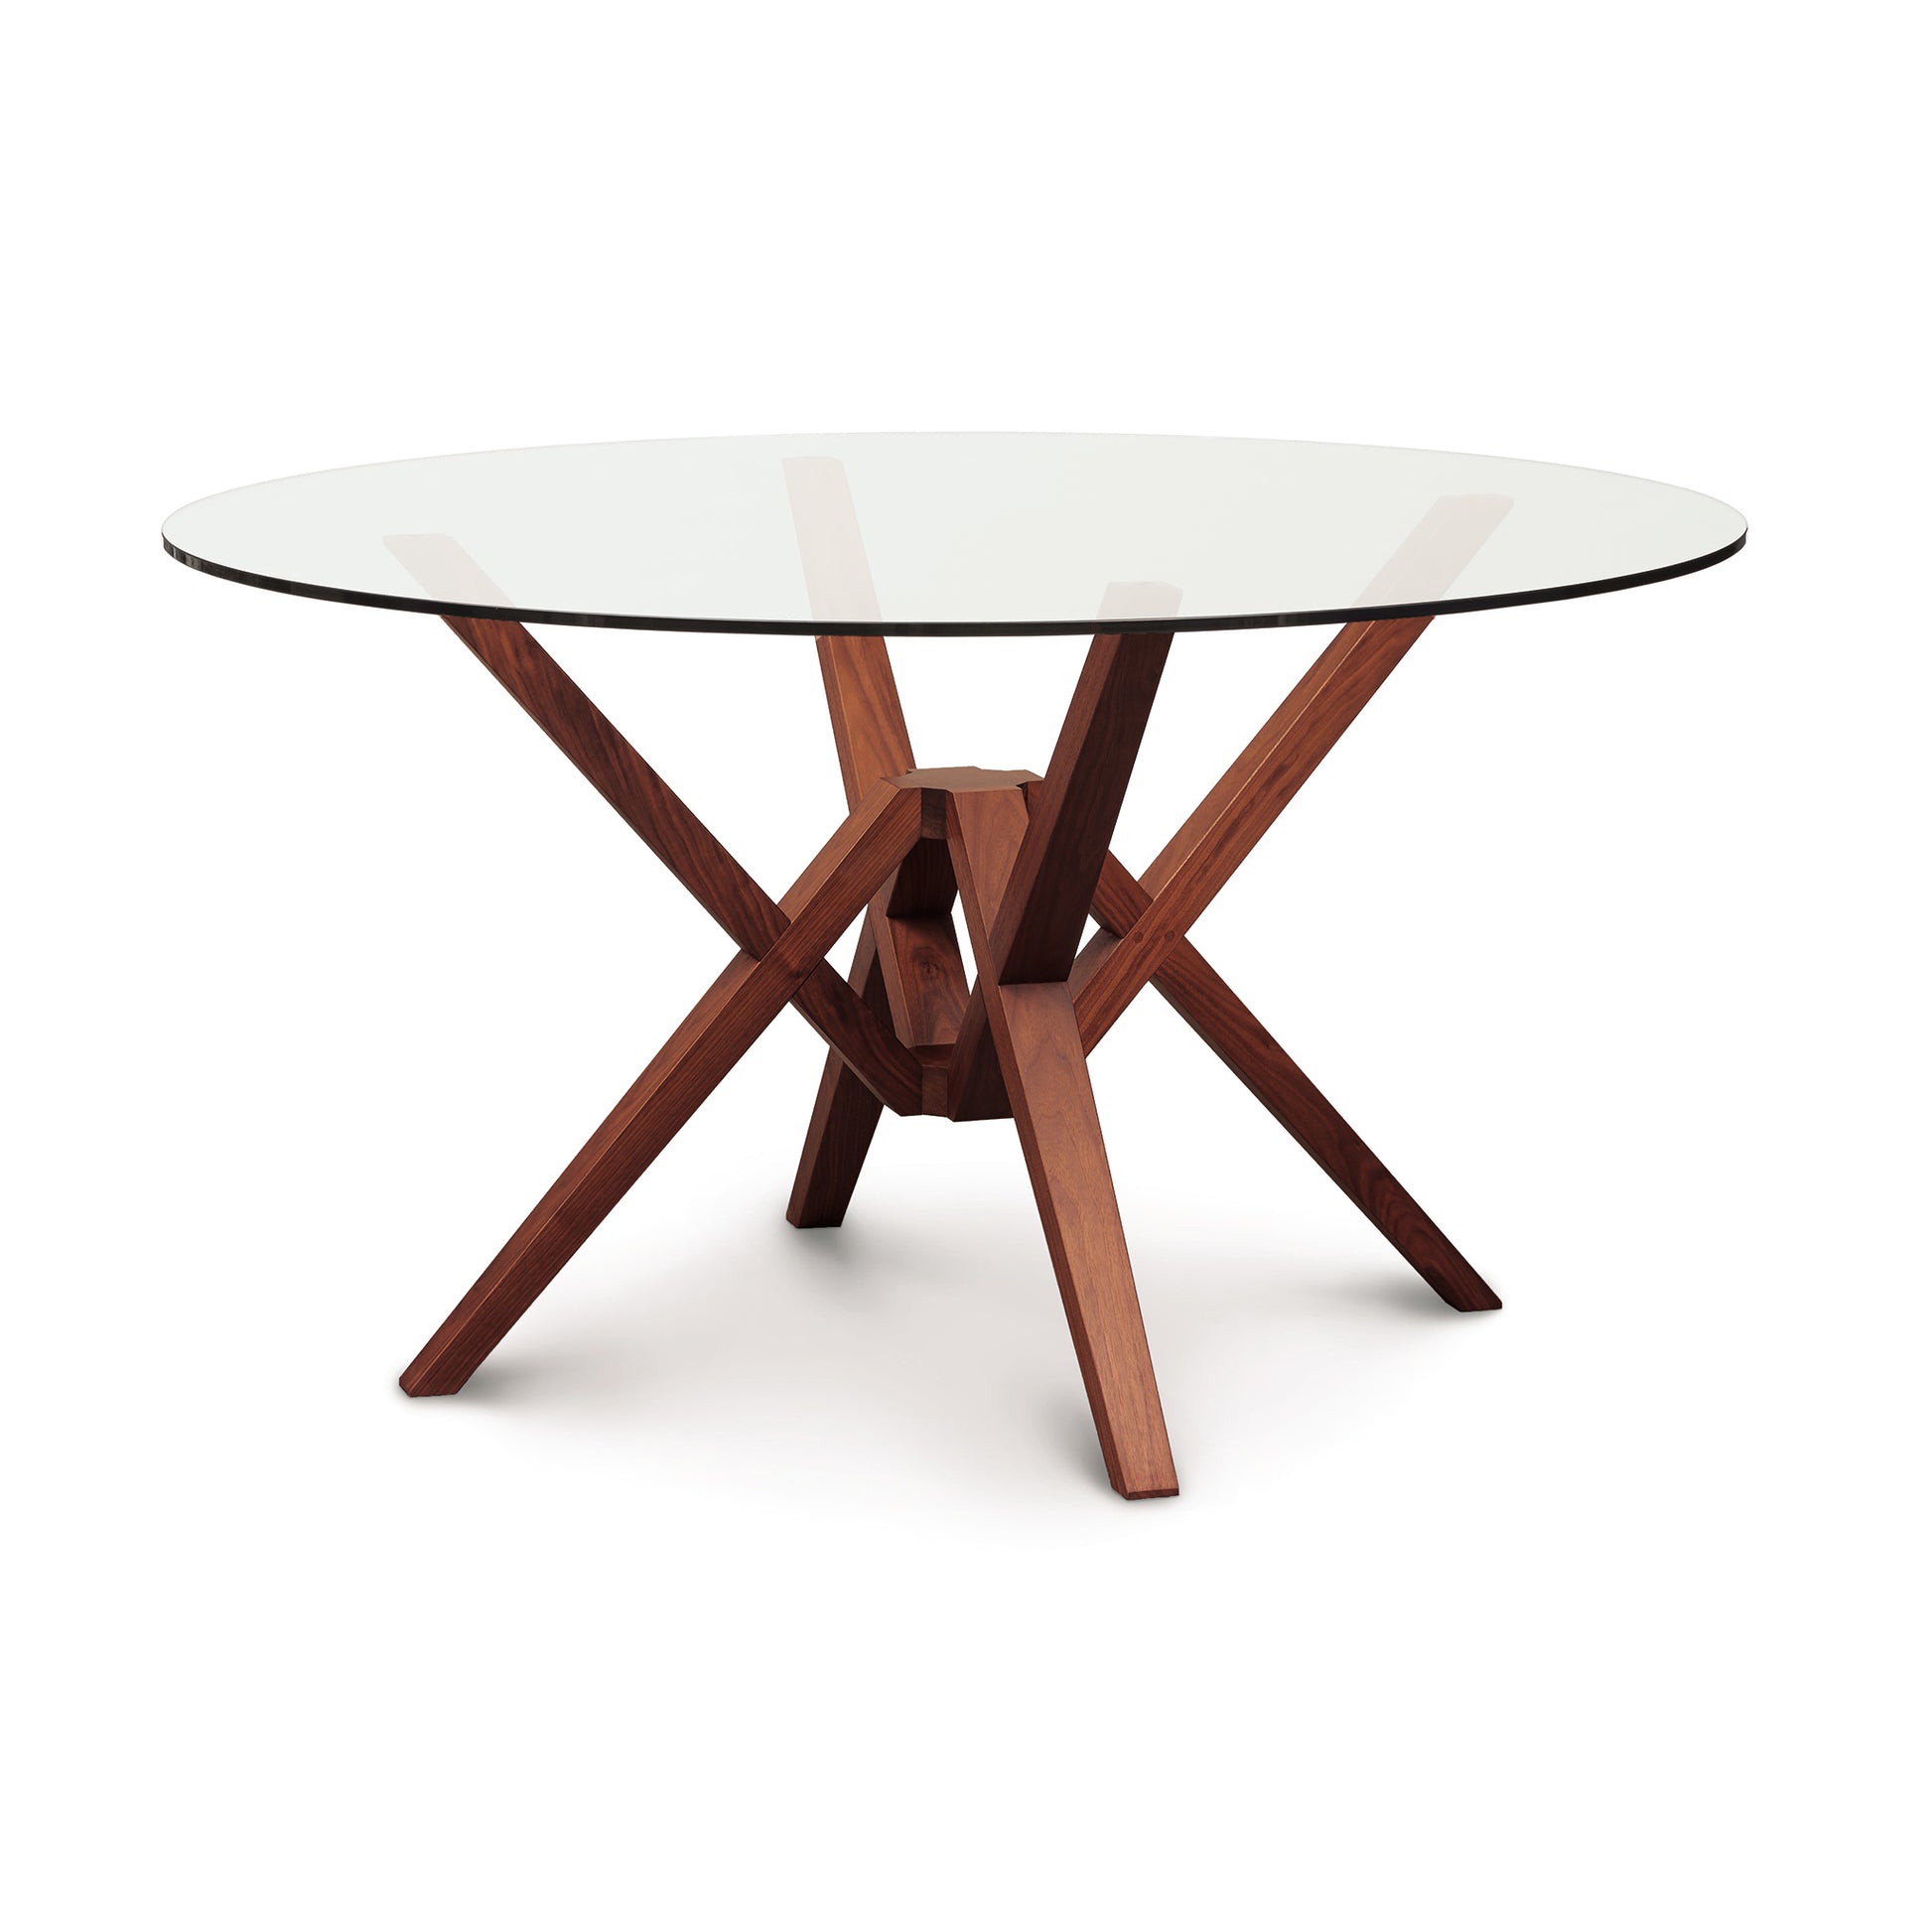 The Copeland Furniture Exeter Round Glass Top Table combines innovative engineering and isometric design with a wooden base and glass top.